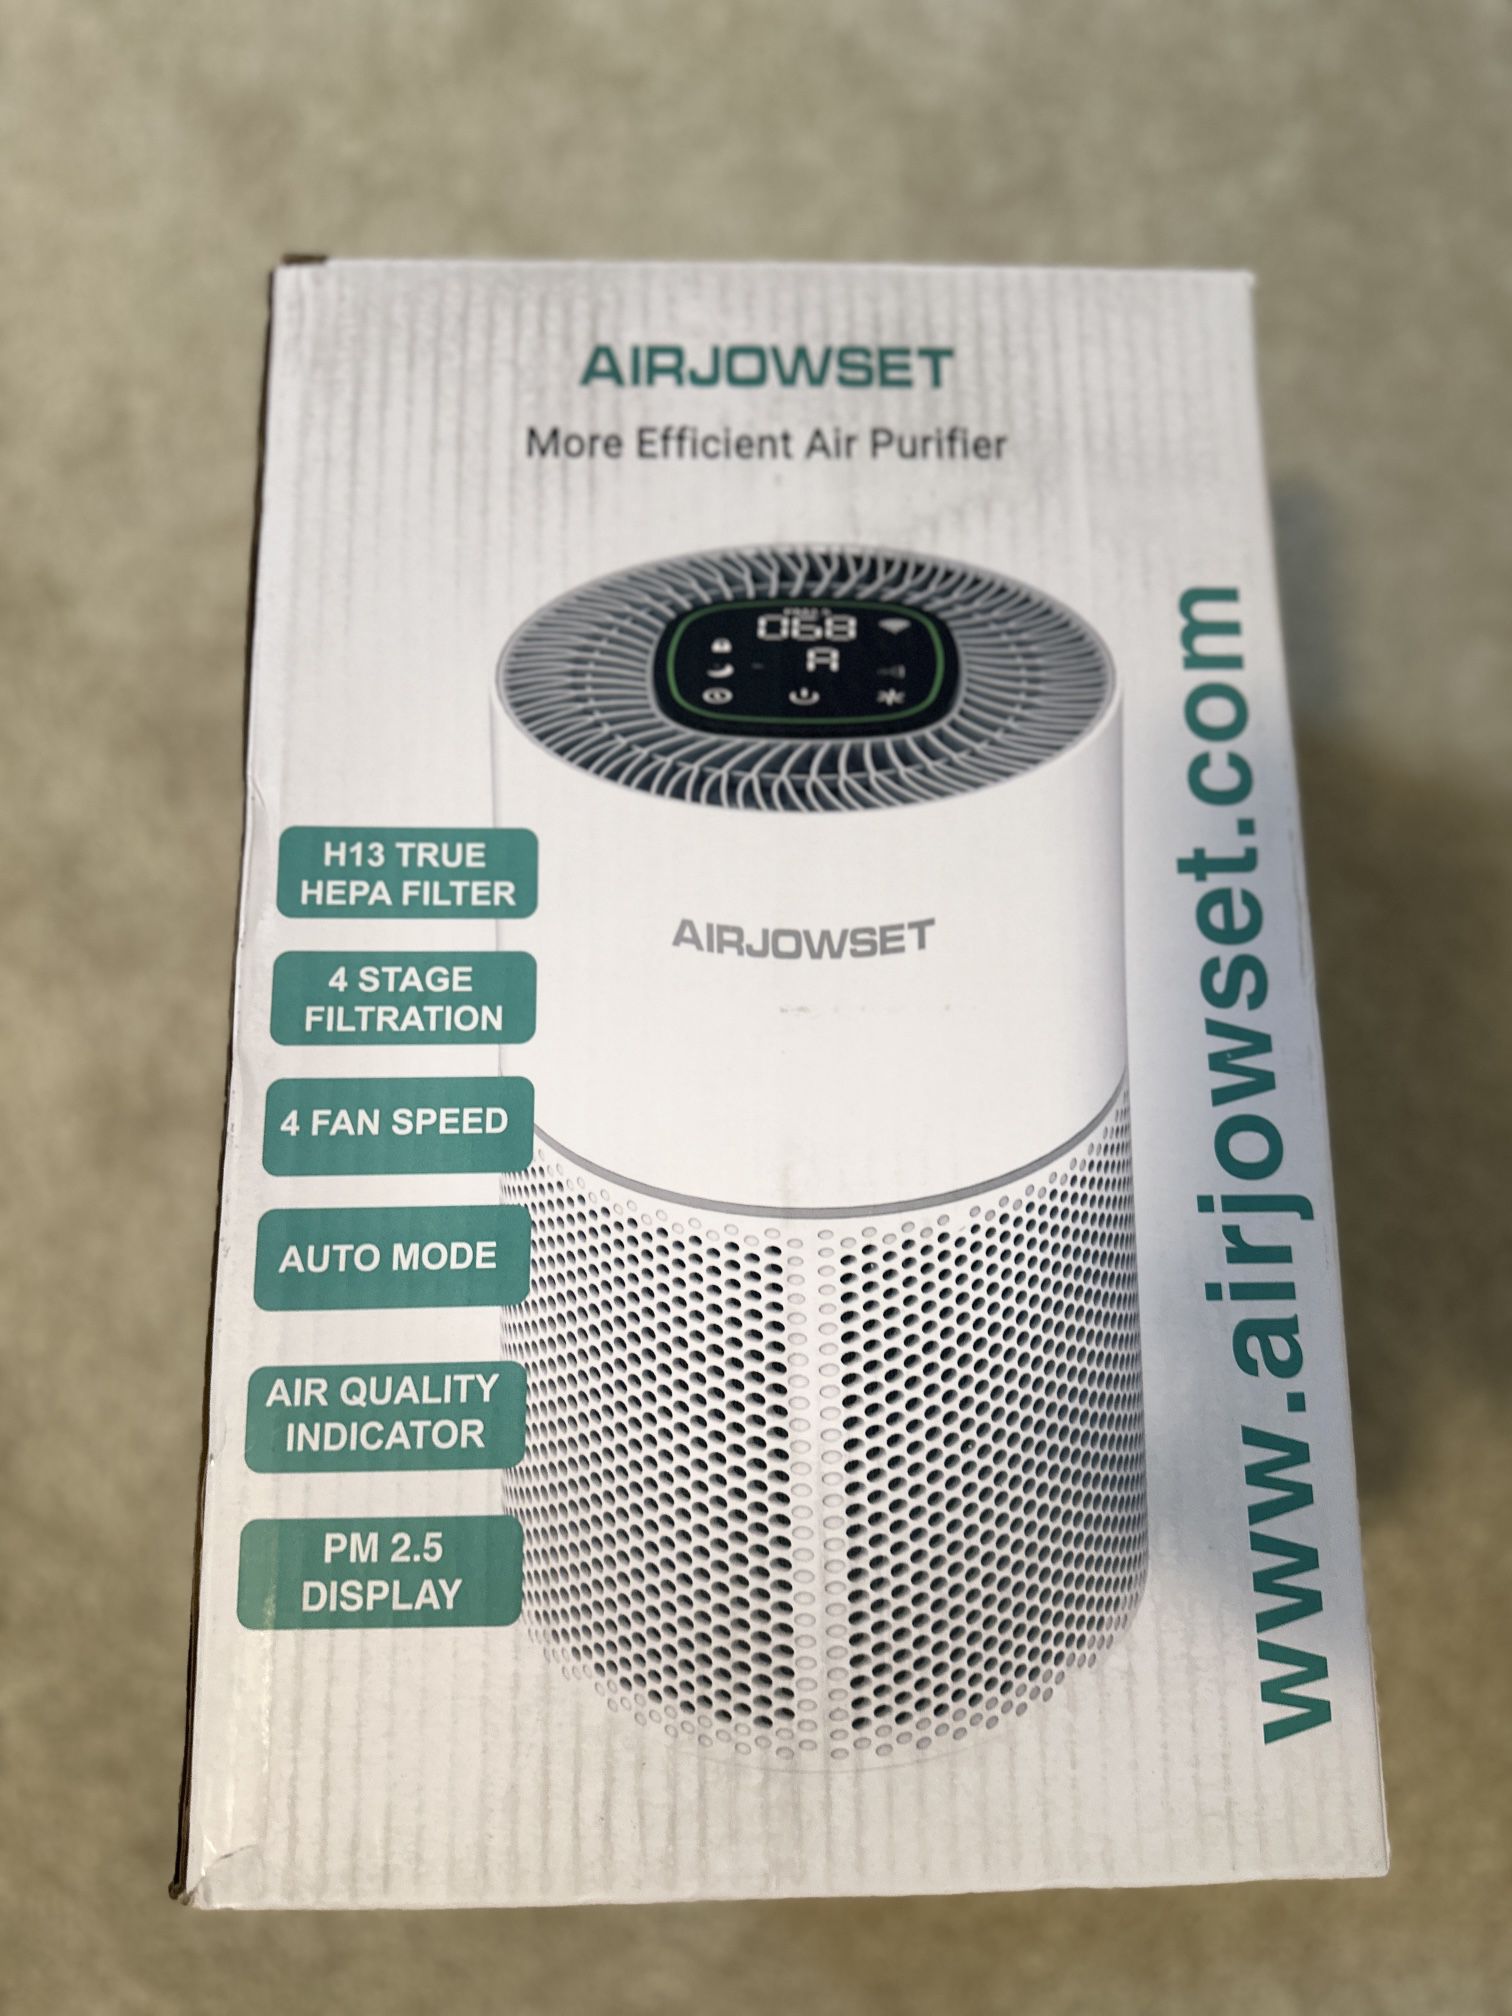 Brand: AIRJOWSET 4.8 4.8 out of 5 stars 53 Smart Wi-Fi Air Purifier, AIRJOWSET H13 True HEPA Filter, Air Purifiers for Home Large Room up to 1290 Ft²,